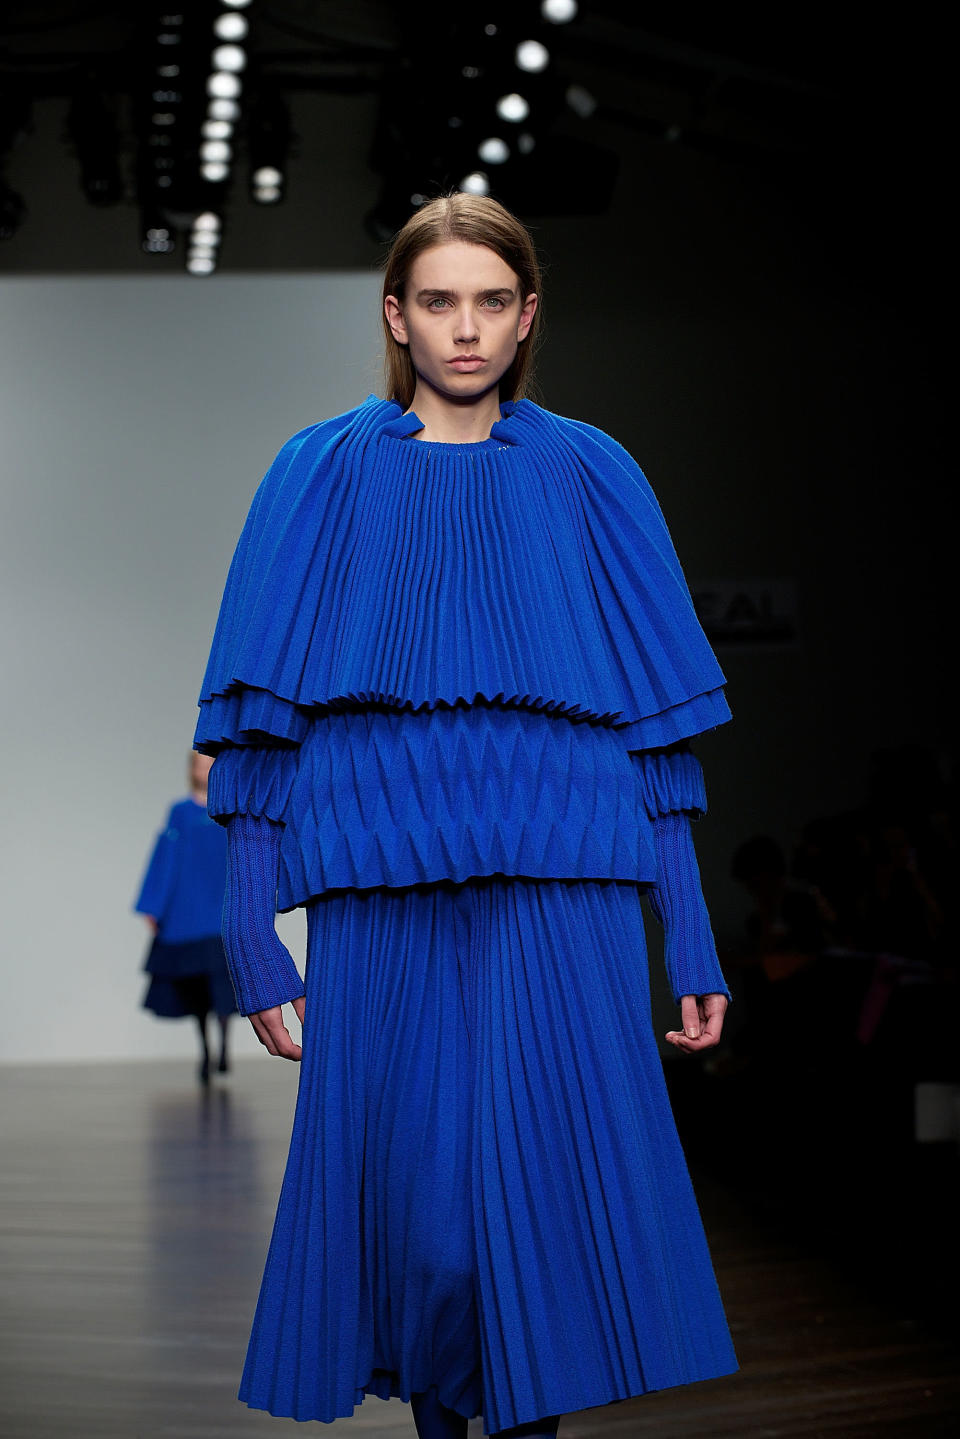 <b>Central Saint Martins</b><br><br>Another beautiful creation that makes us fear for the size of our future wardrobes. <br><br>©Getty